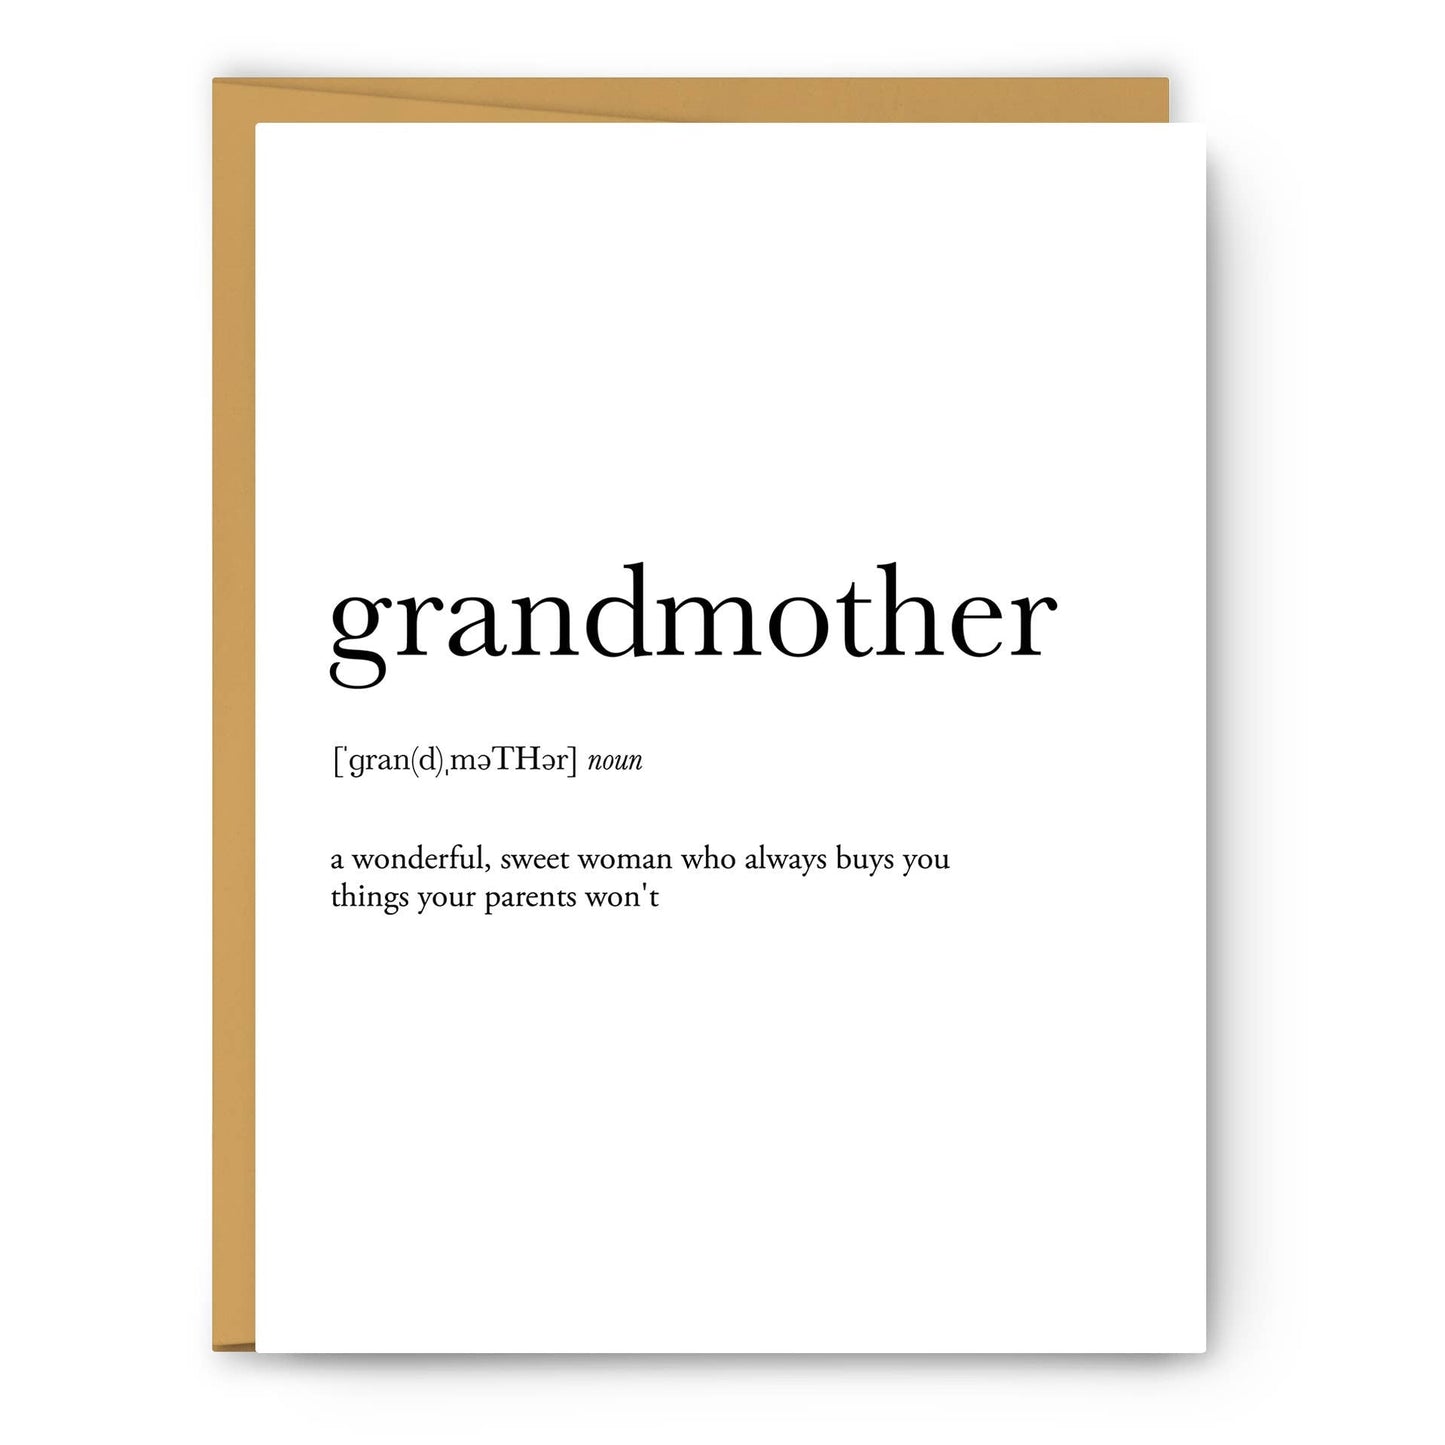 Grandmother Definition - Mother's Day Card - PaperGeenius